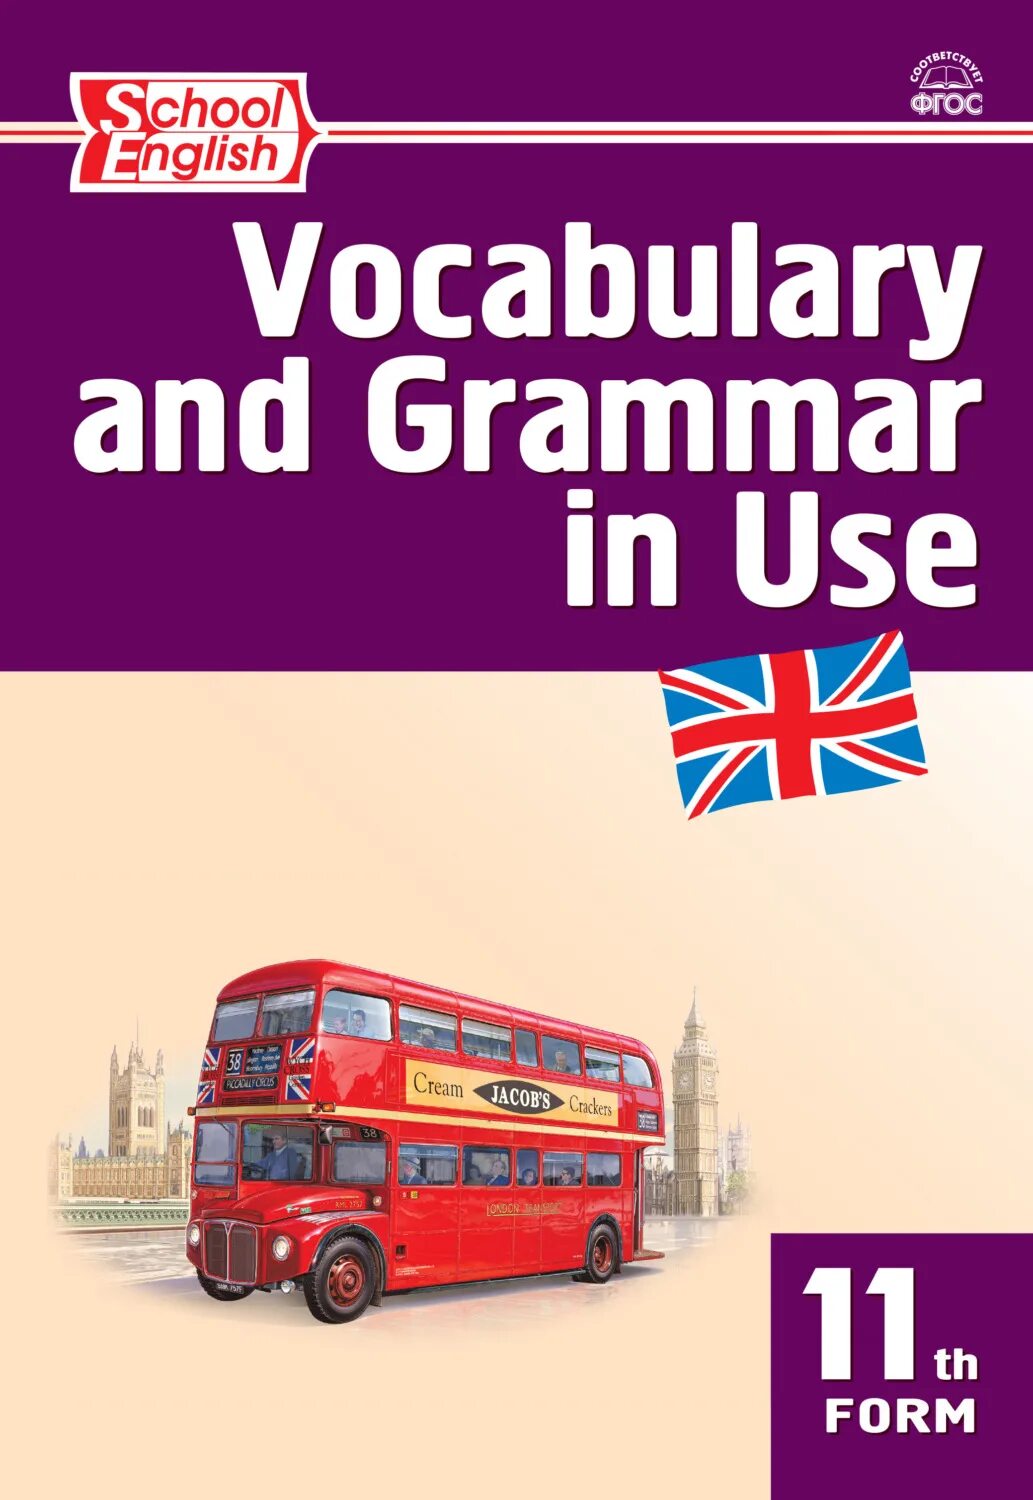 Vocabulary and Grammar in use. Вако английский язык. Английский язык ФГОС сборник. English Grammar and Vocabulary. Английский 7 класс english in use